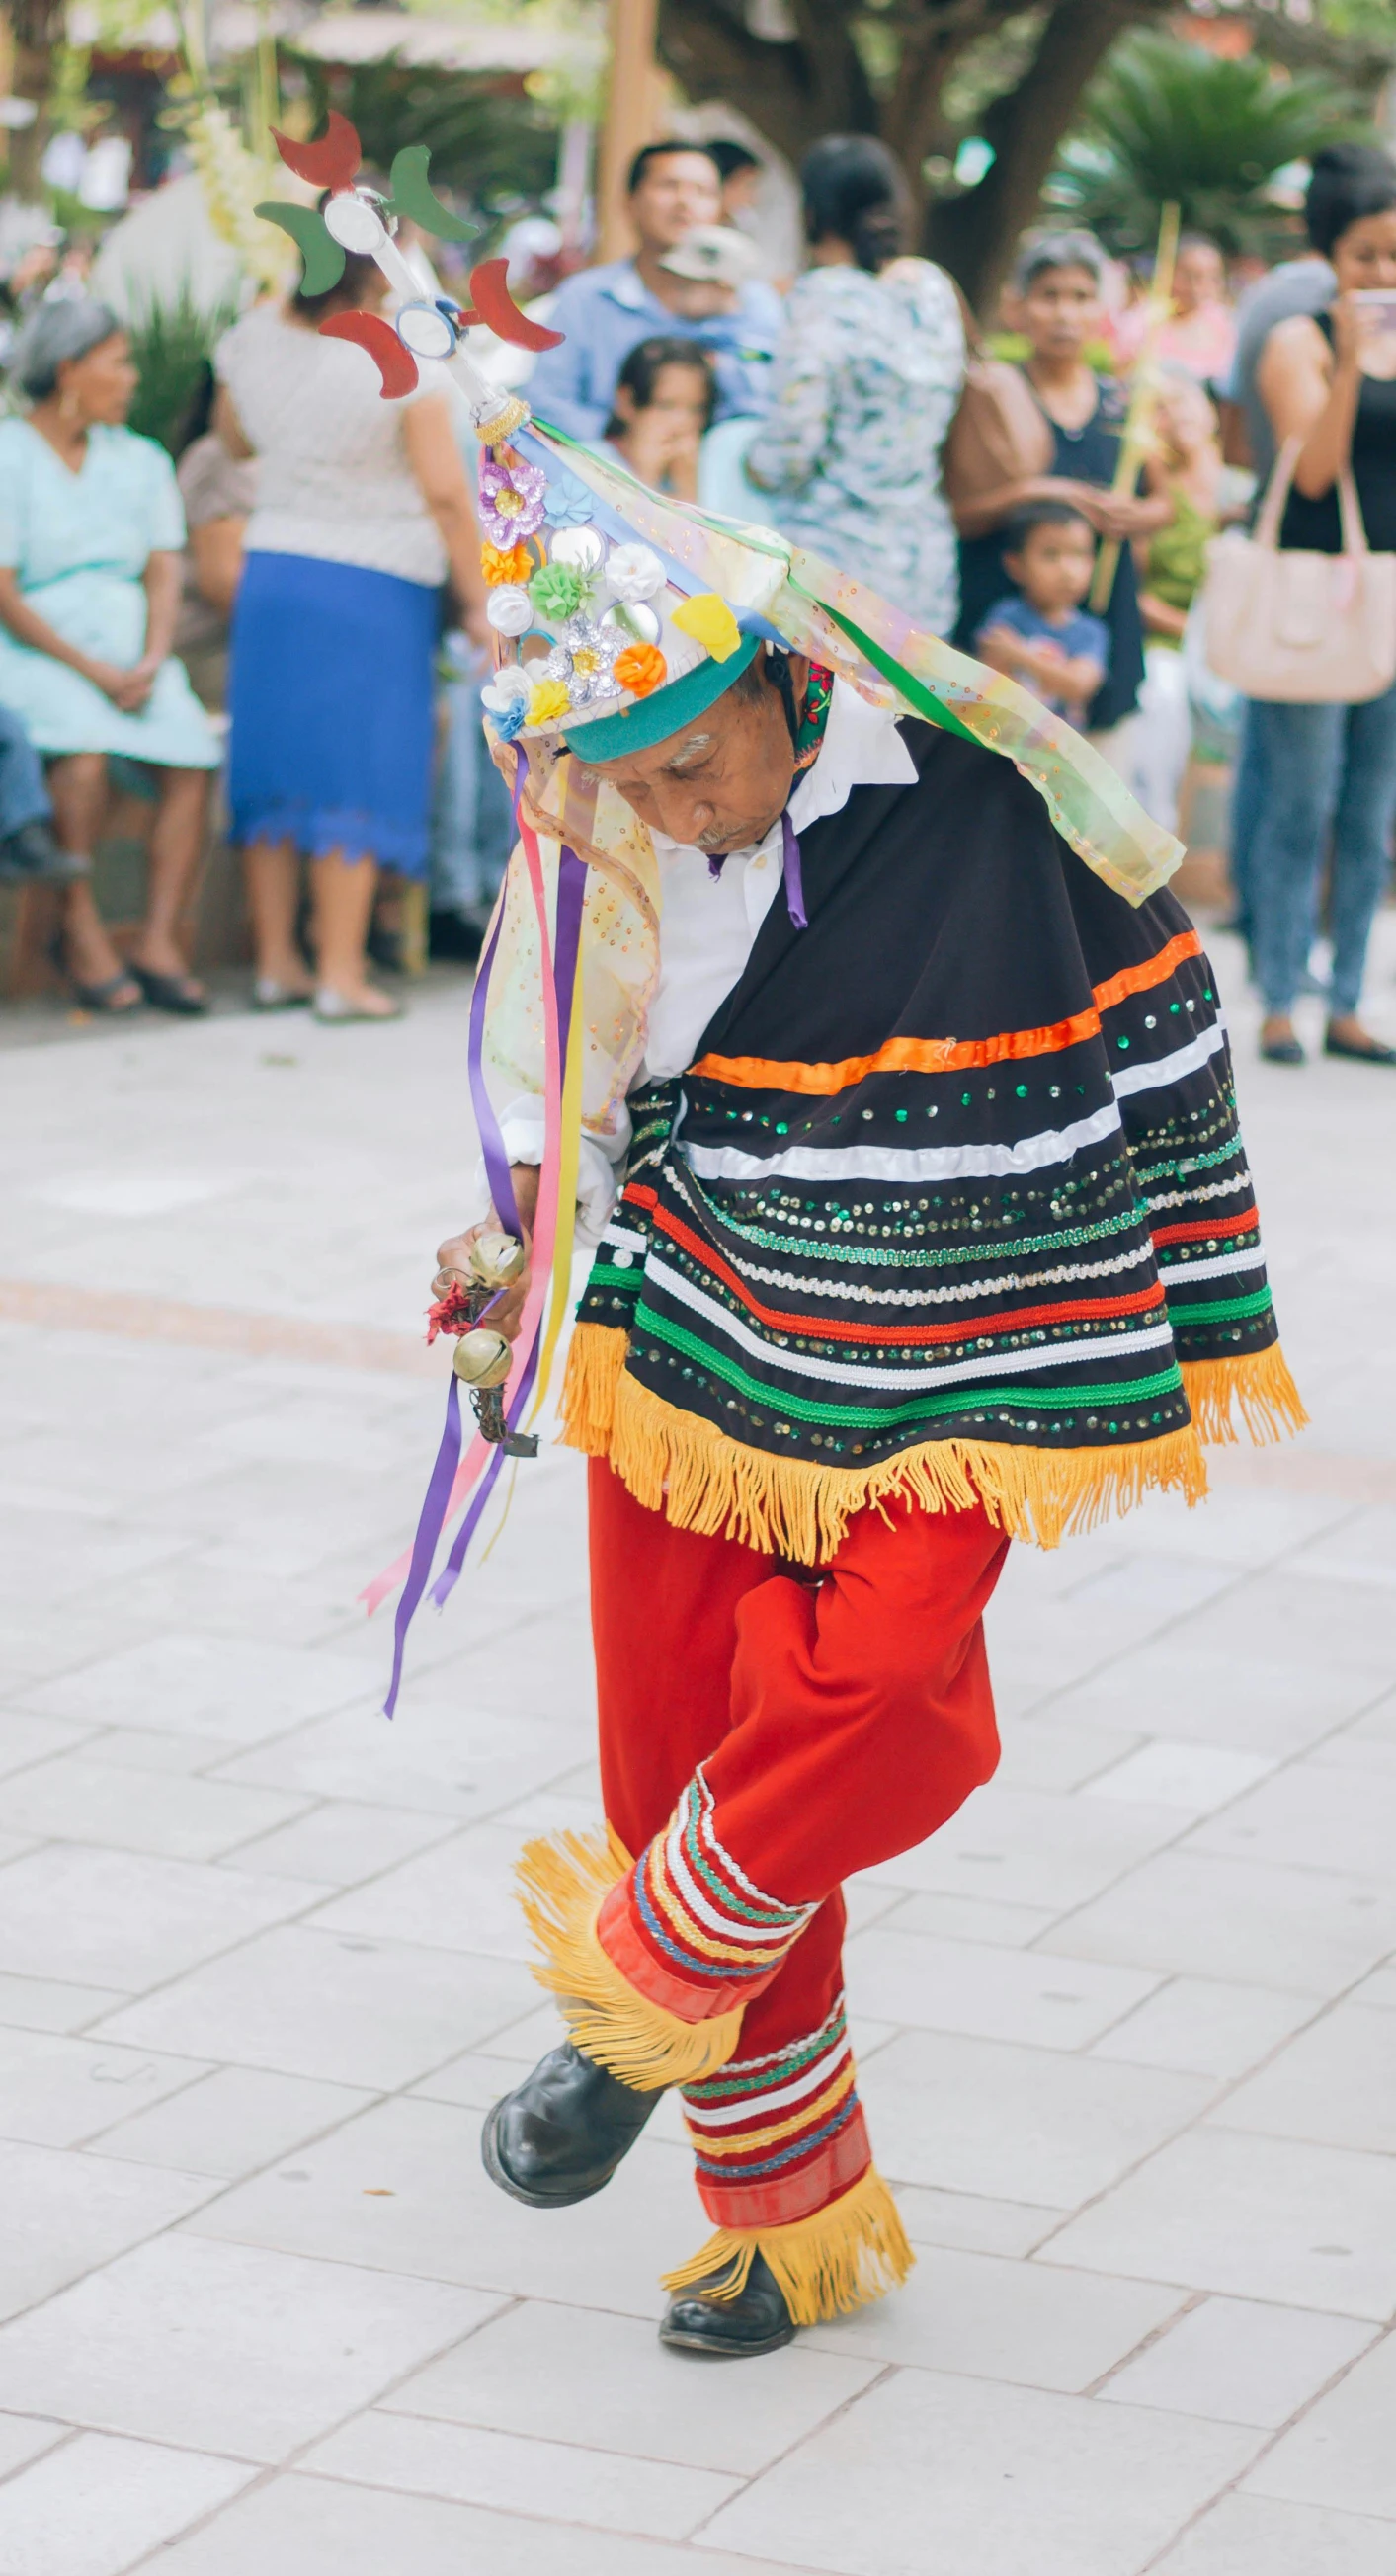 a child in native clothing, with people in the background